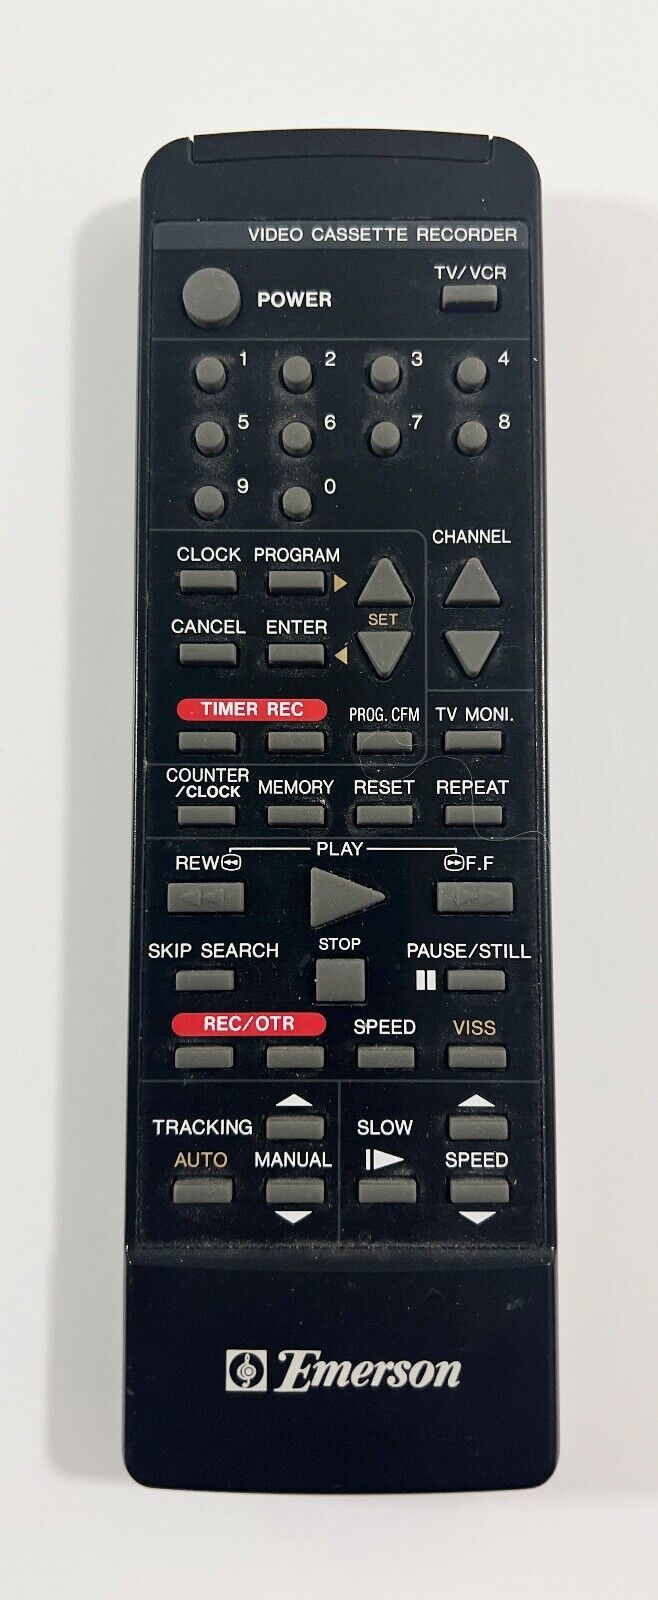 Primary image for Emerson Part No. 076R004060 Remote Video Cassette Recorder Remote. Tested Works!